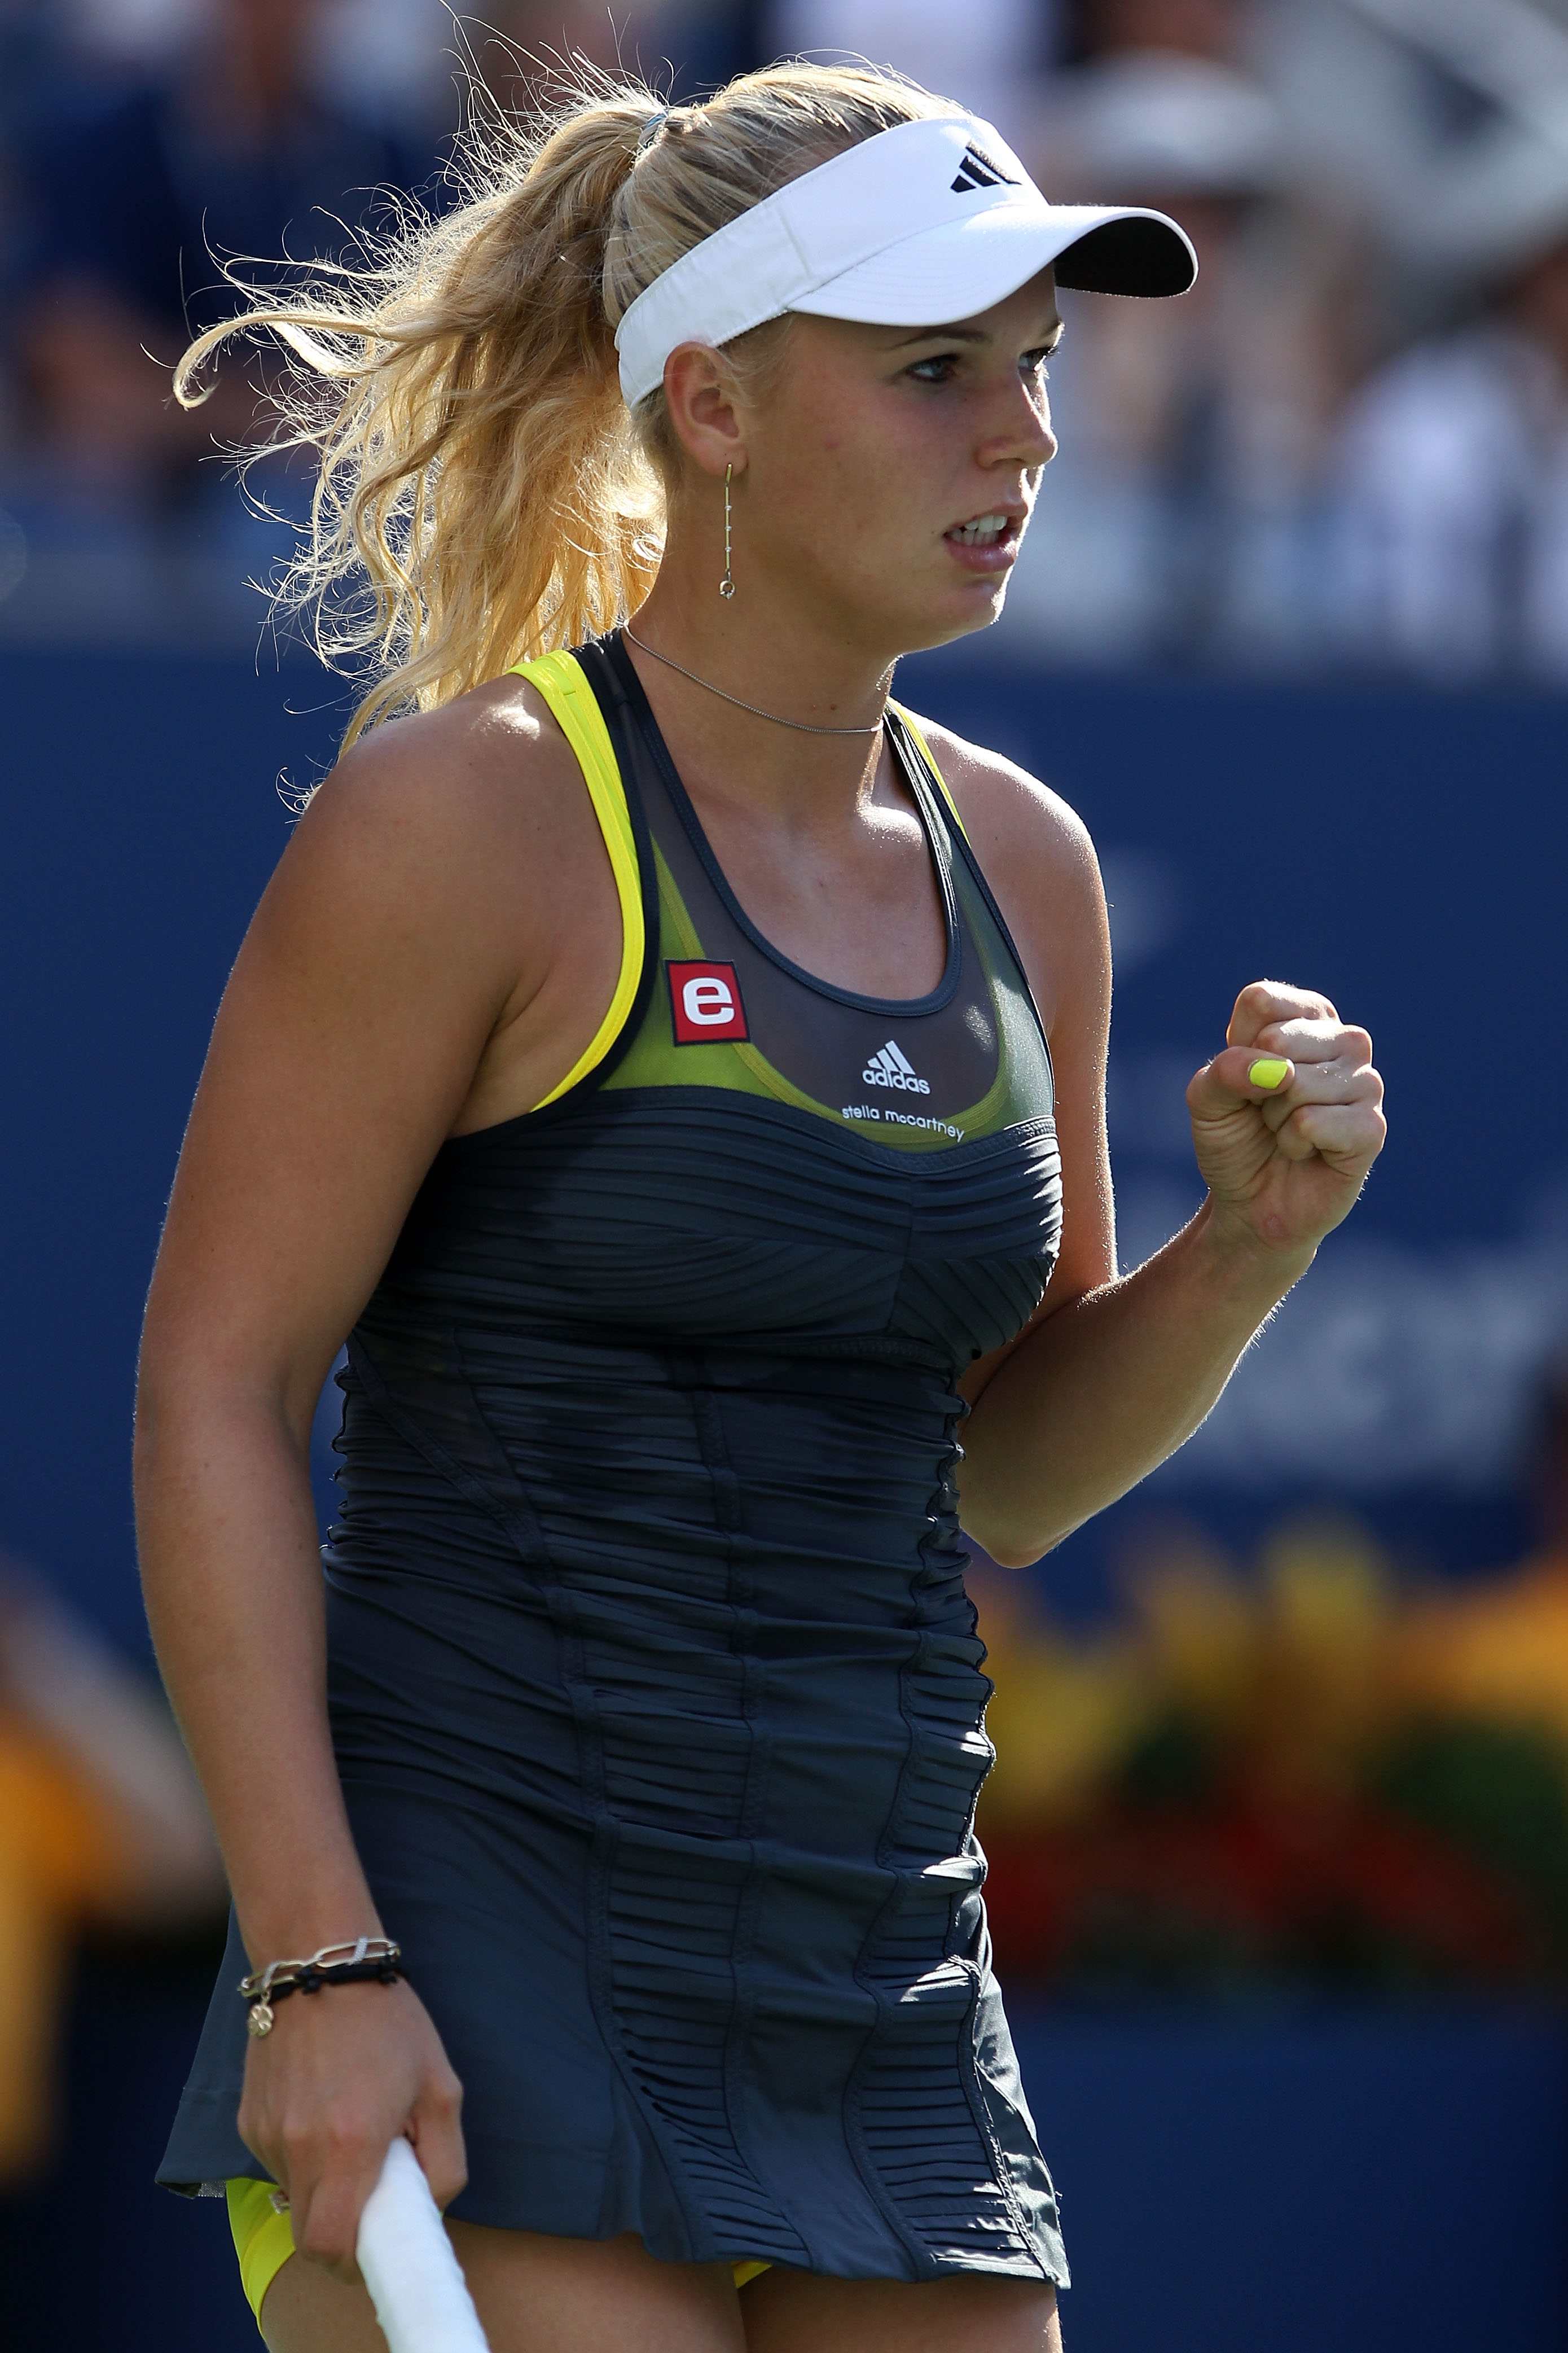 NEW YORK - SEPTEMBER 06:  Caroline Wozniacki of Denmark celebrates after a point against Maria Sharapova of Russia during the women's singles match on day eight of the 2010 U.S. Open at the USTA Billie Jean King National Tennis Center on September 6, 2010